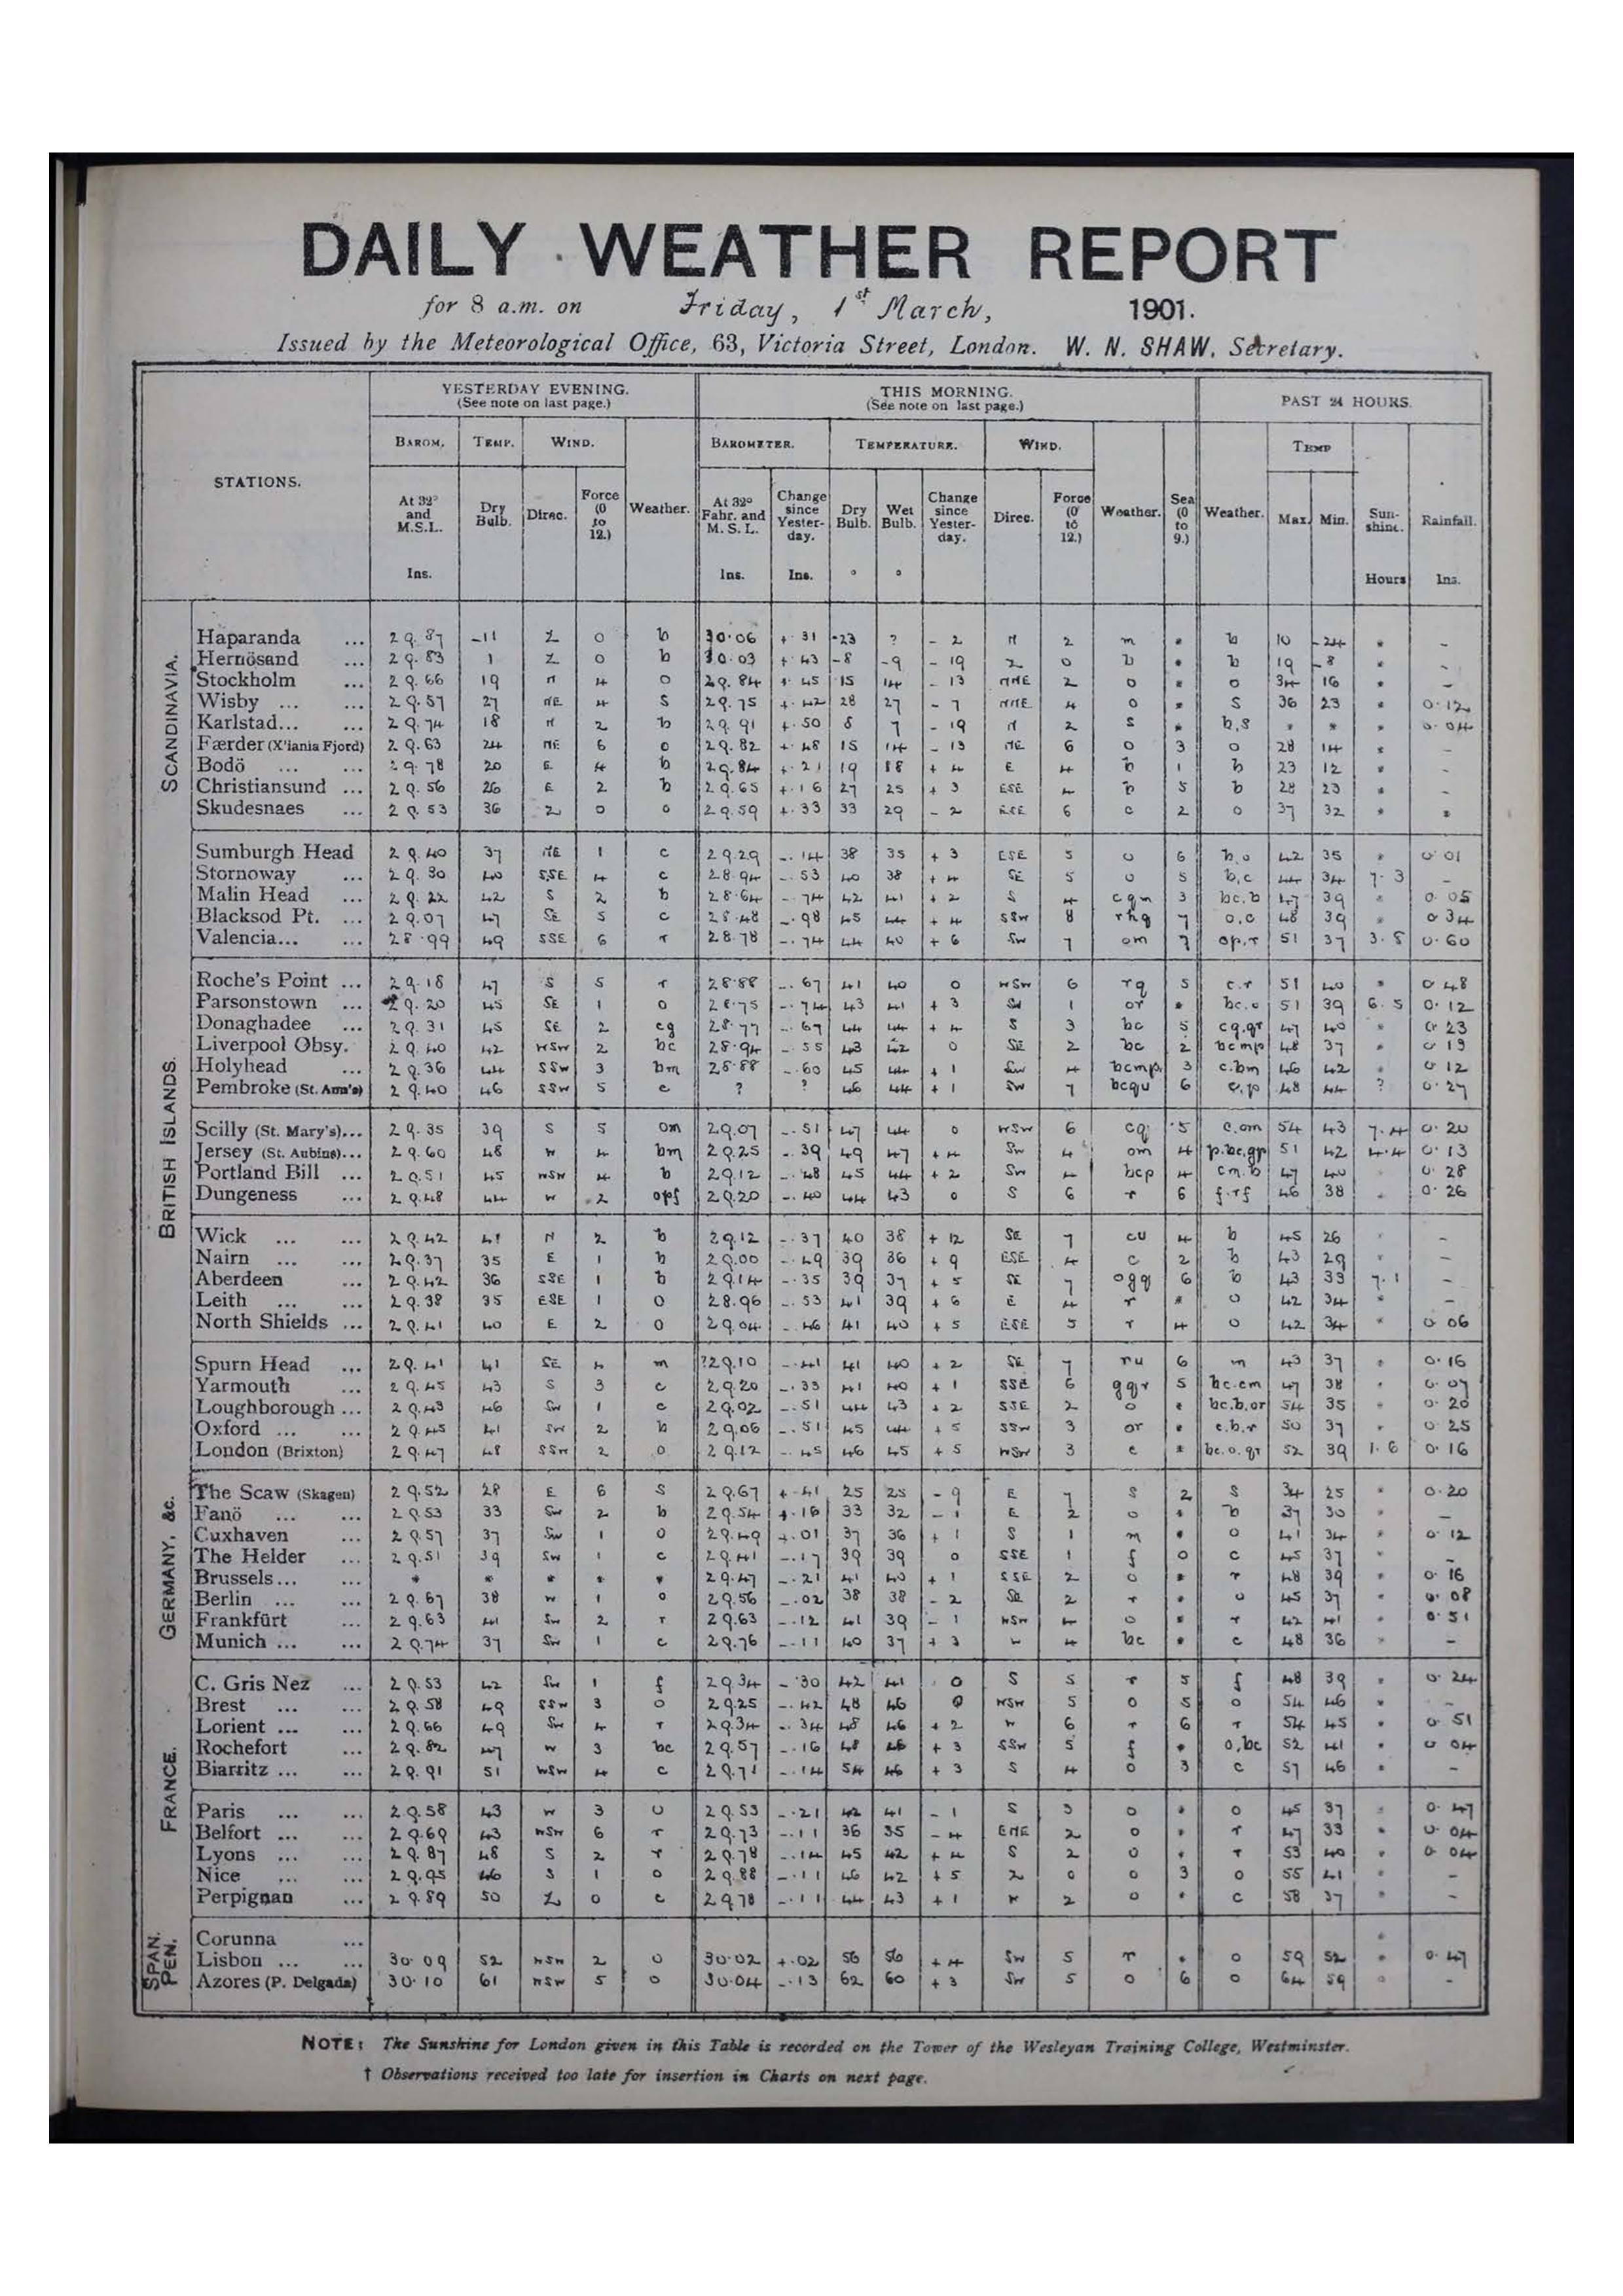 Left-hand page, data table